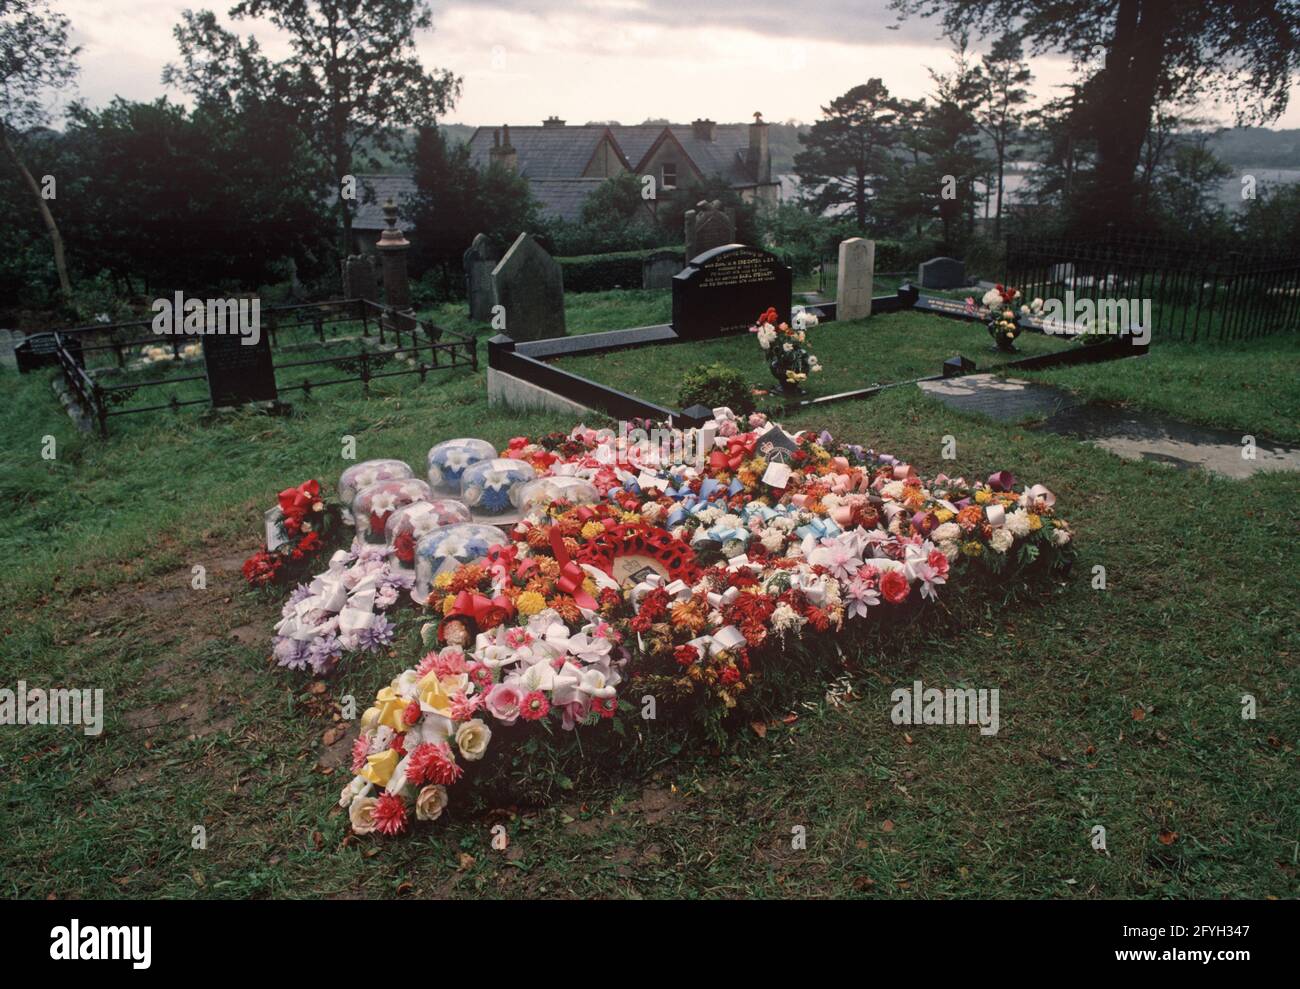 COUNTY FERMANAGH, UNITED KINGDOM - OCTOBER 1980, Floral Wreaths on RUC, Royal Ulster Constabulary, policeman's grave who was shot by the IRA, Northern Ireland, 1970s Stock Photo